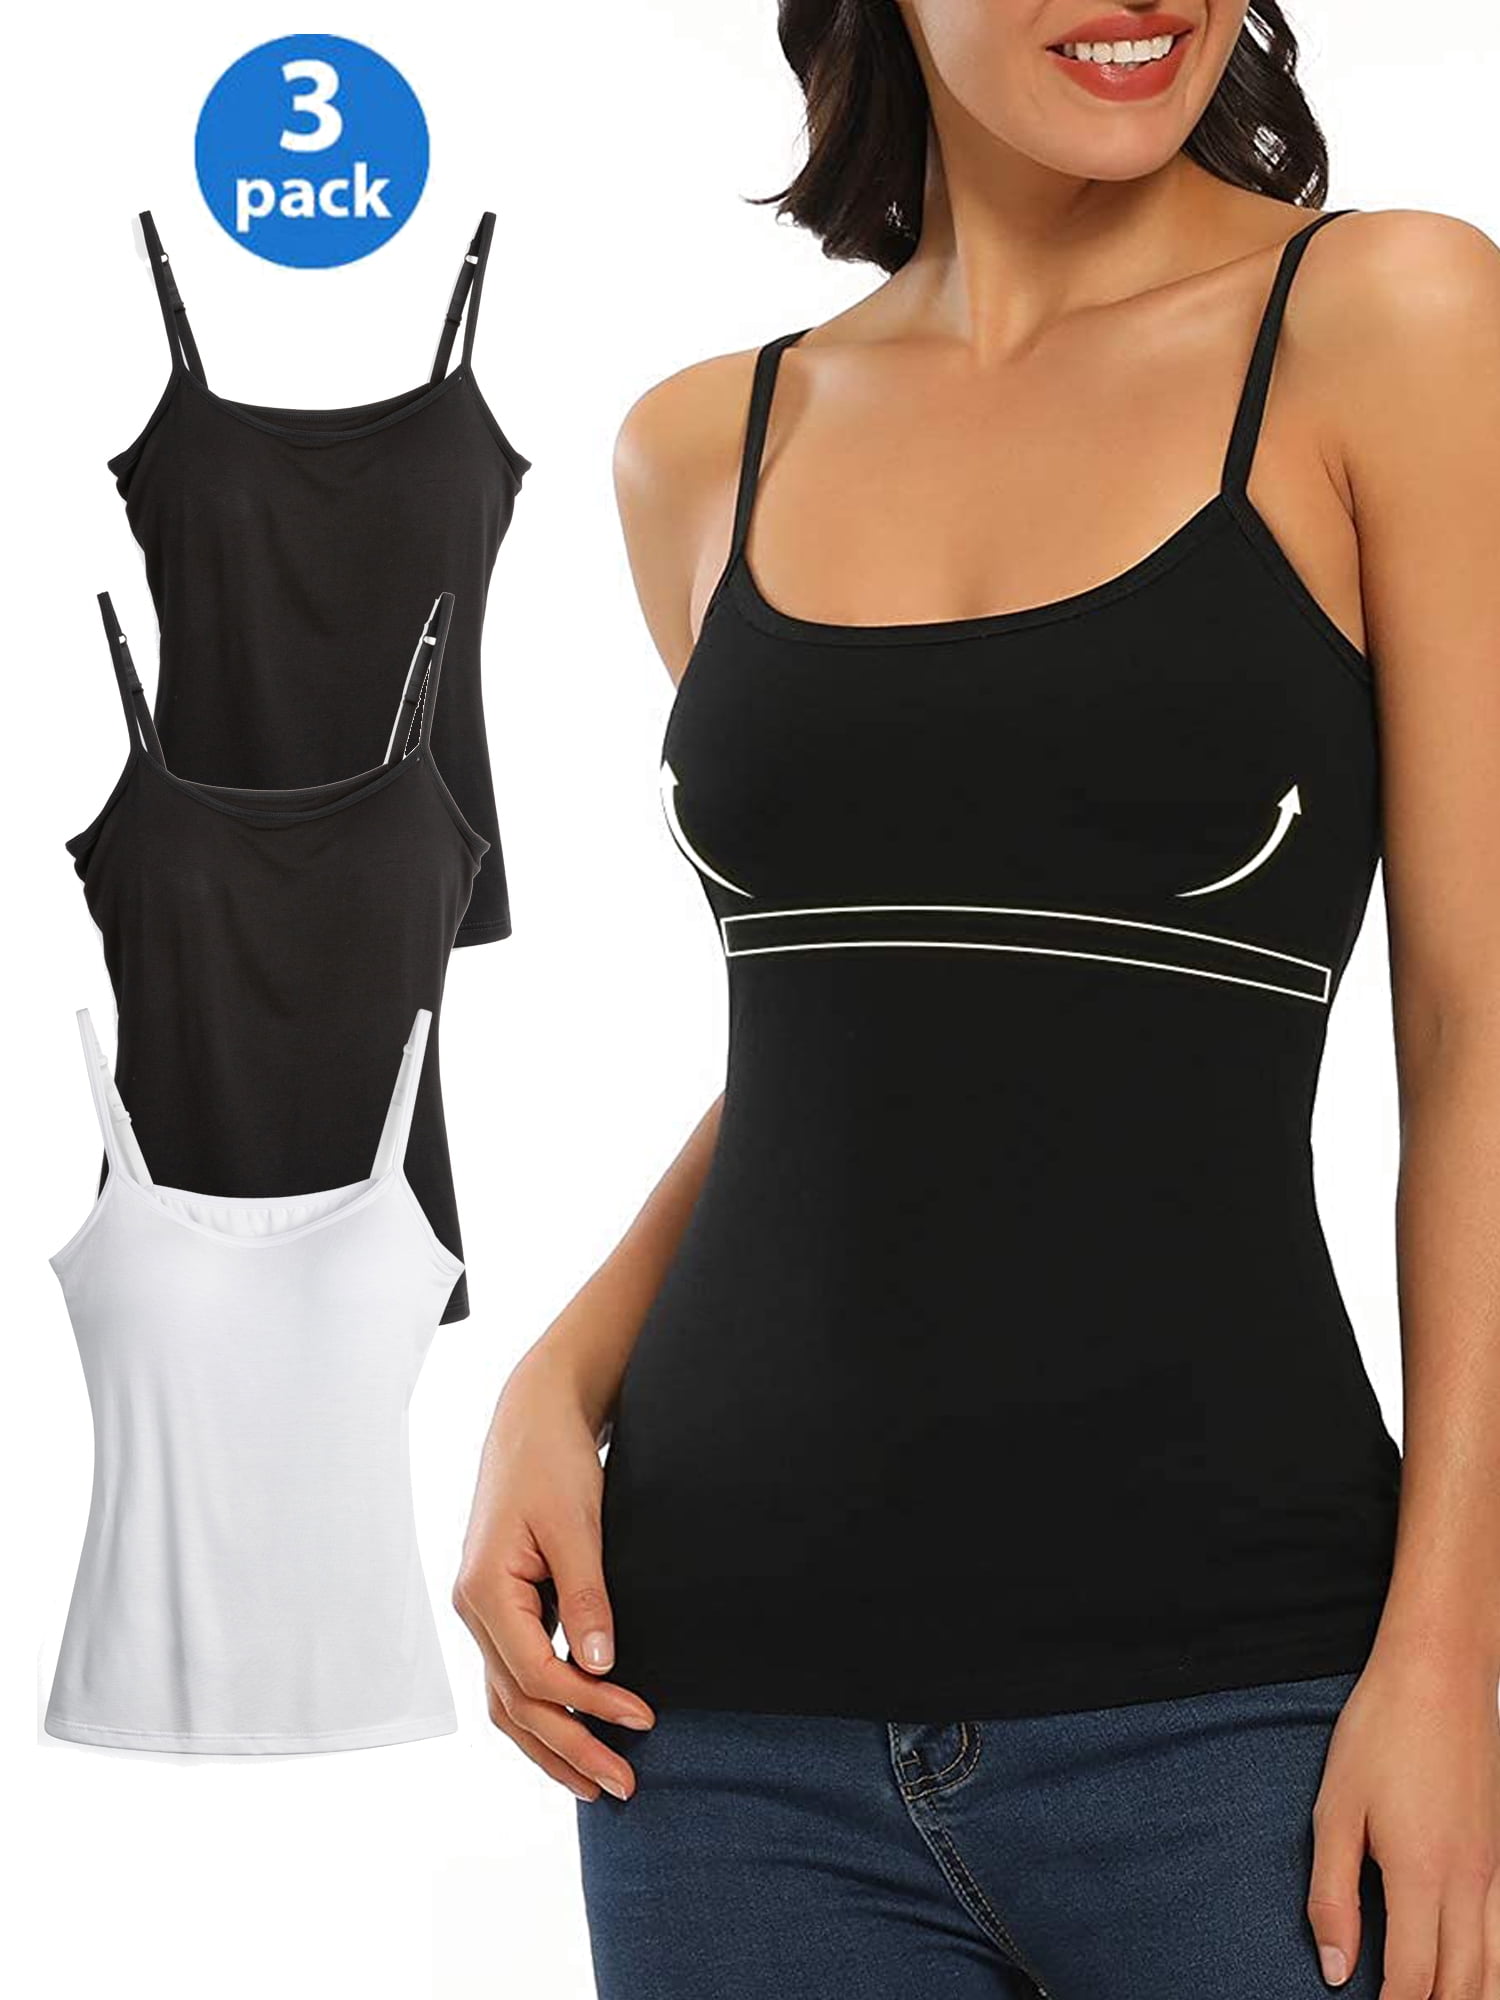 Women Padded Bra Camisole Top Vest Female Camisole With Built In Bra Black  XL 